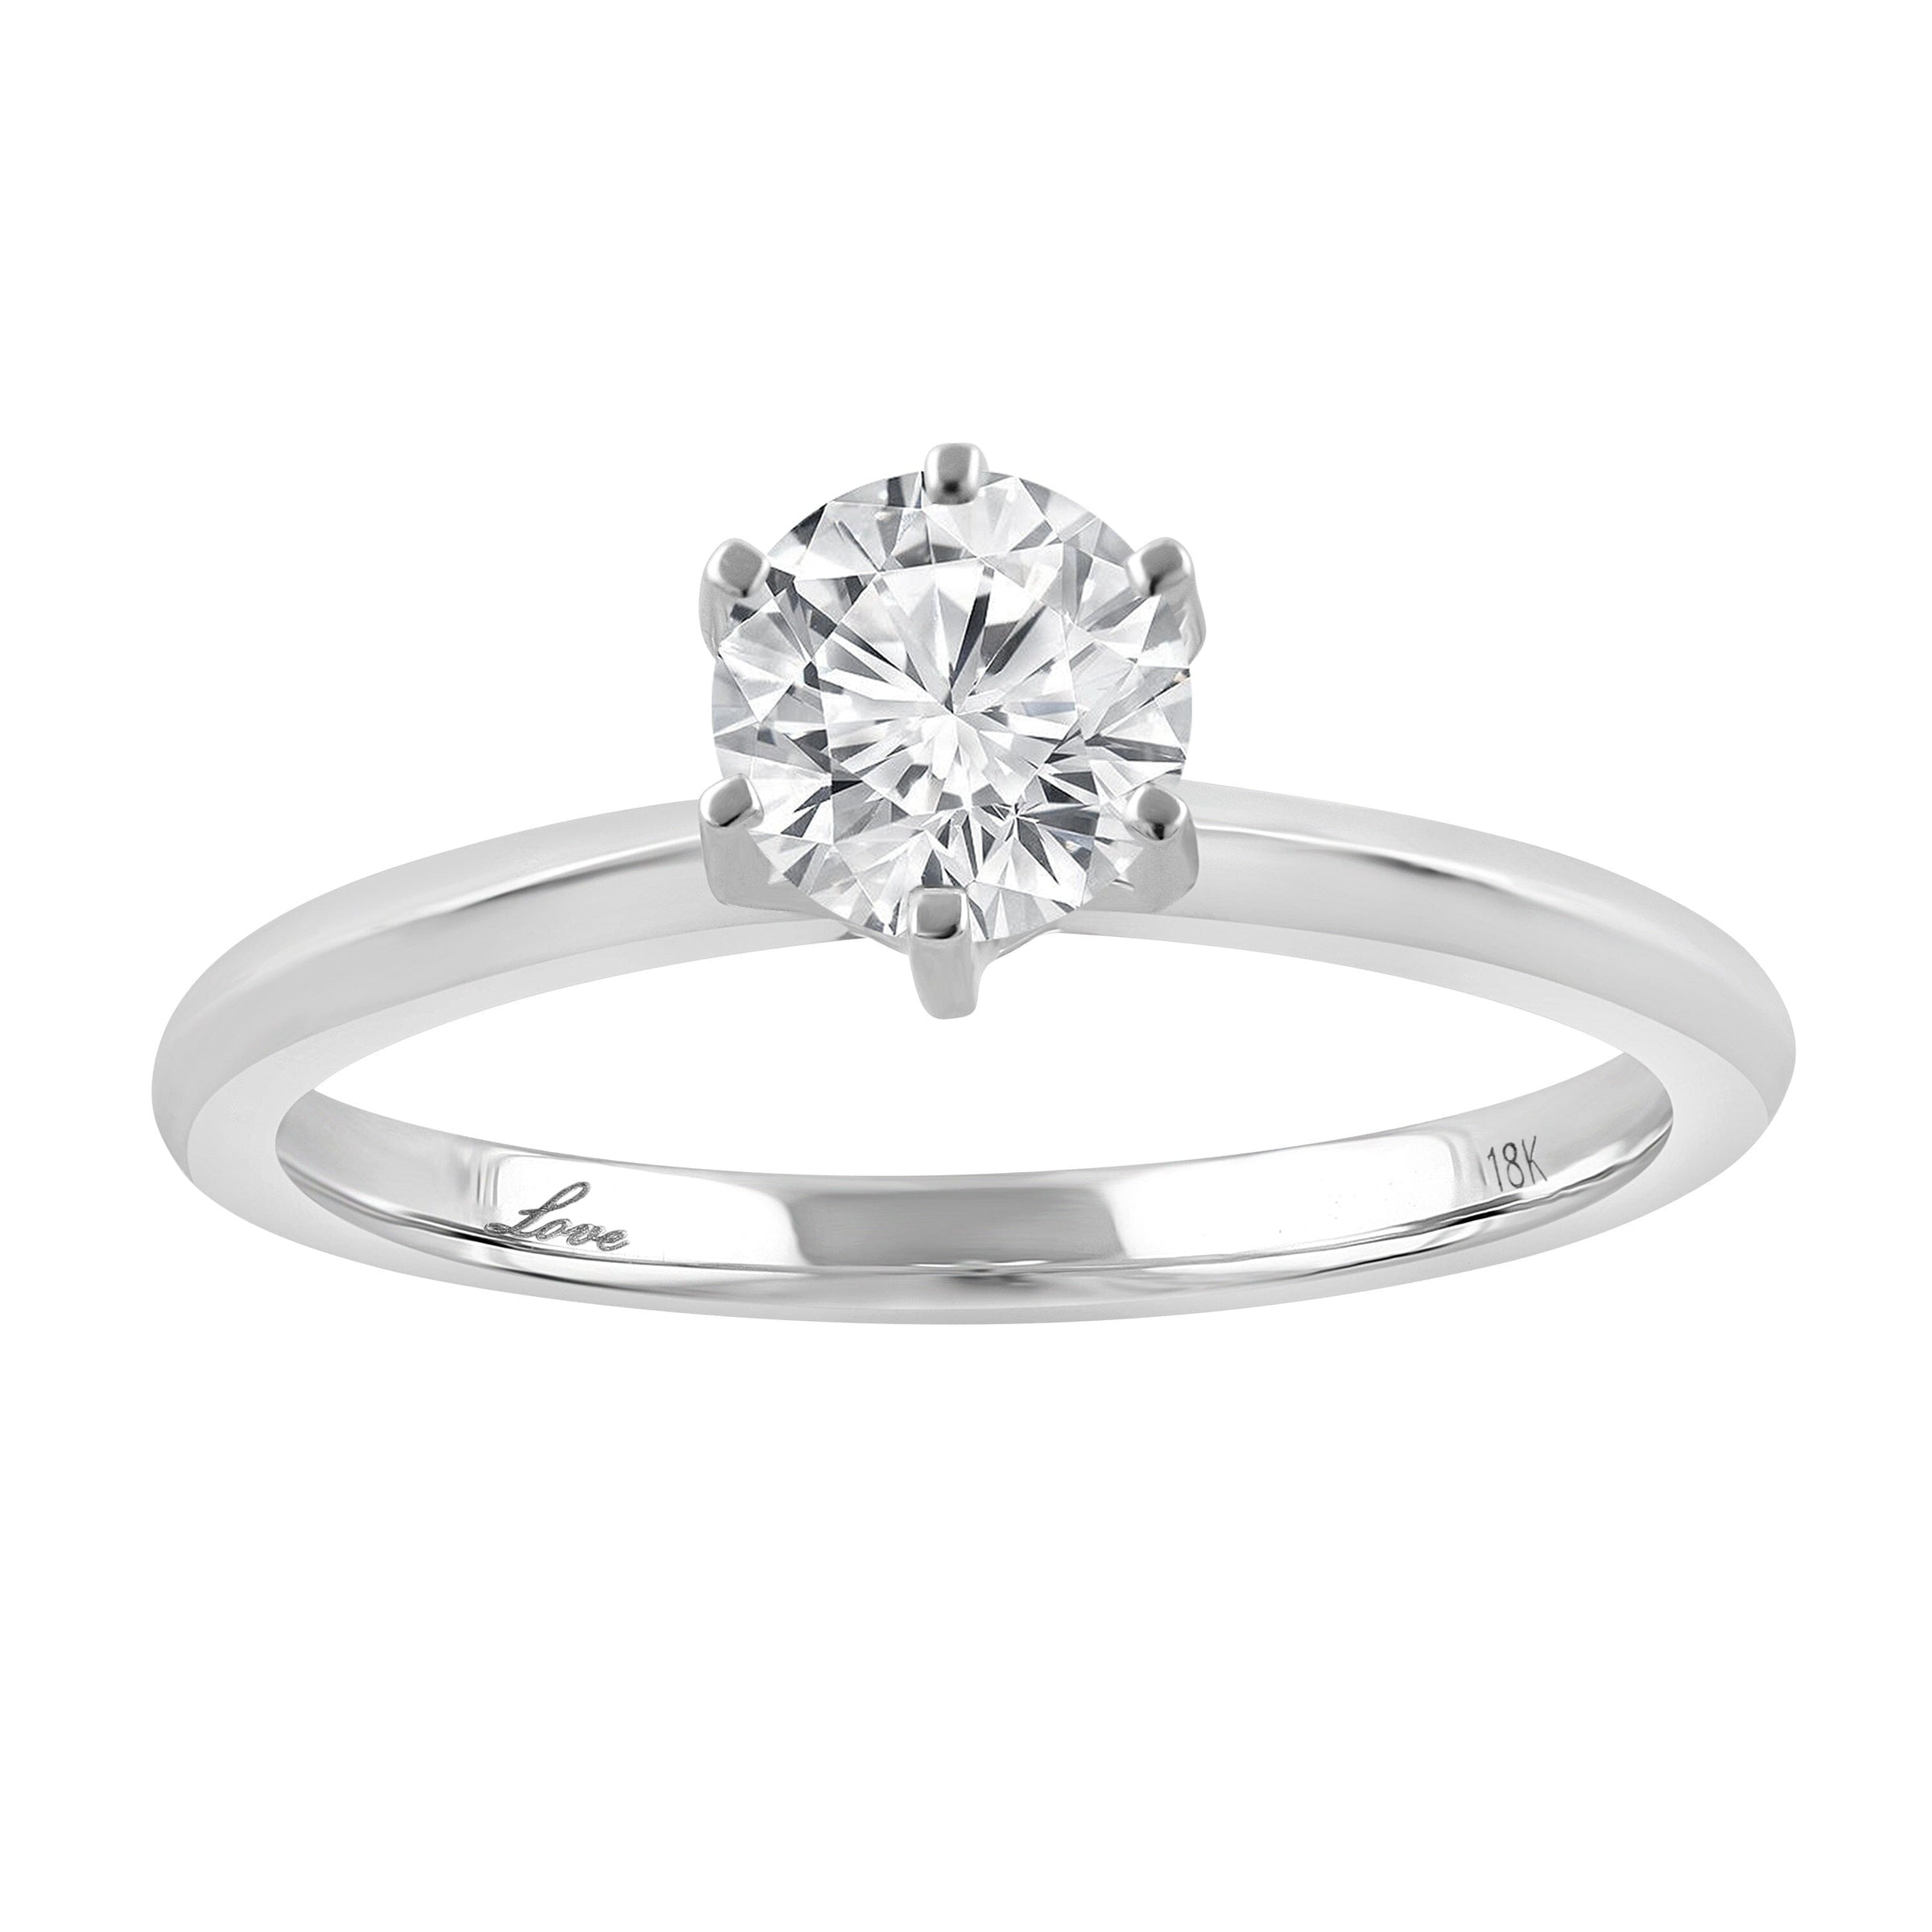 Facets of Love Solitaire Ring with 0.70ct of Diamonds in 18ct White Gold Rings Bevilles 